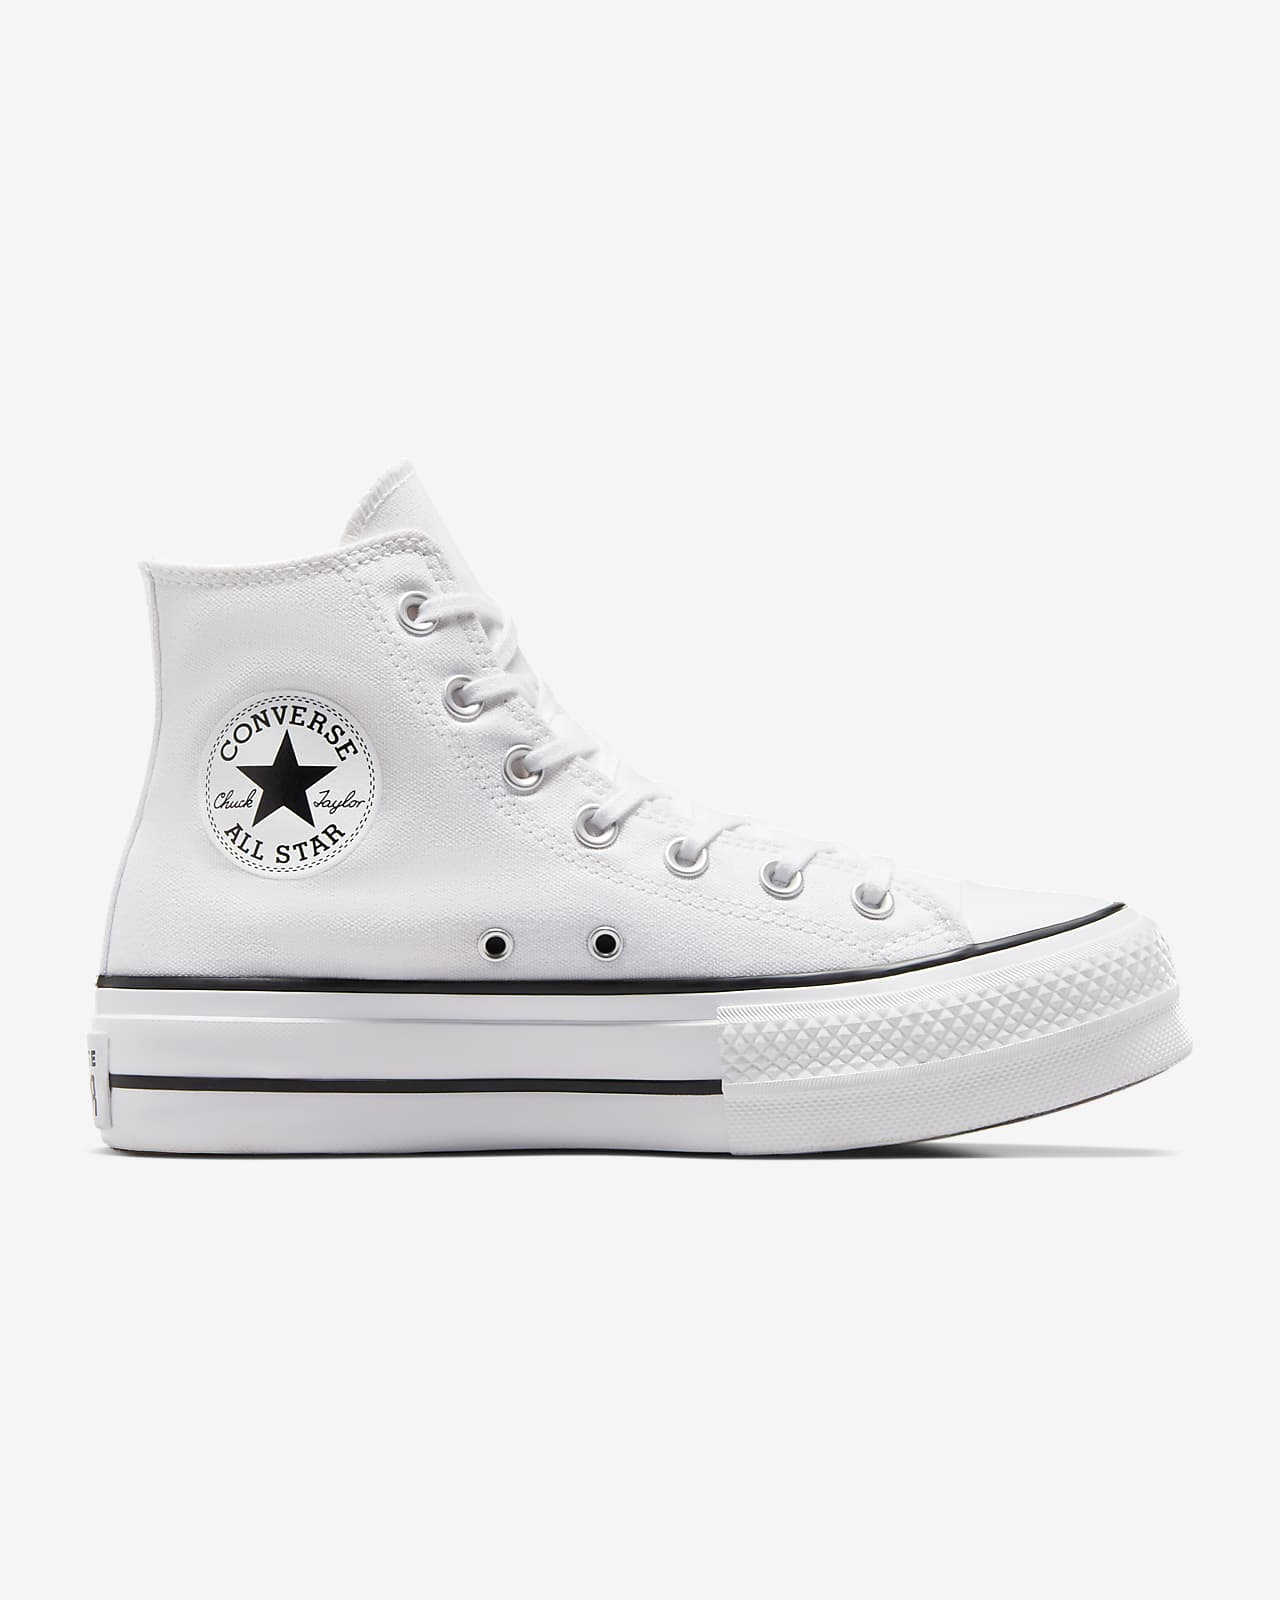 https://static.nike.com/a/images/t_PDP_1280_v1/f_auto,q_auto:eco/bc5aad5f-c56f-4c41-84c9-570d5fec5d1b/chuck-taylor-all-star-lift-platform-canvas-womens-shoes-1kxzVW.png